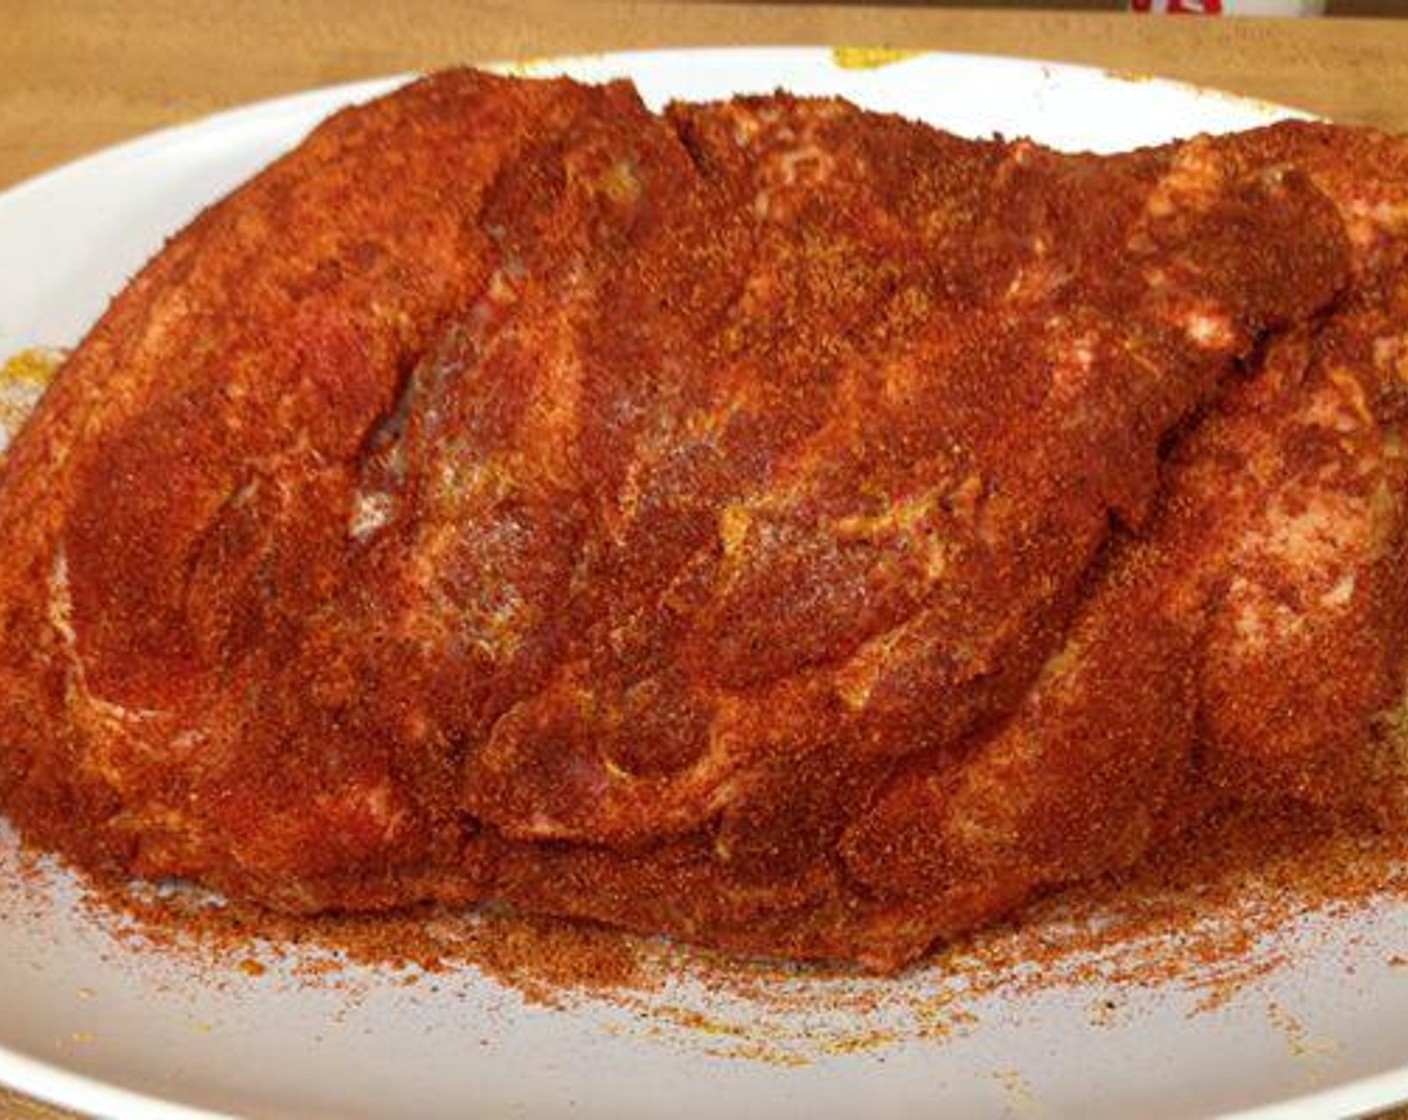 step 2 To make fresh barbecue, coat the Pork Shoulder (8 lb) with Yellow Mustard (2 Tbsp). Then liberally sprinkle Barbecue Rub (to taste) over the pork and gently massage it into the meat.